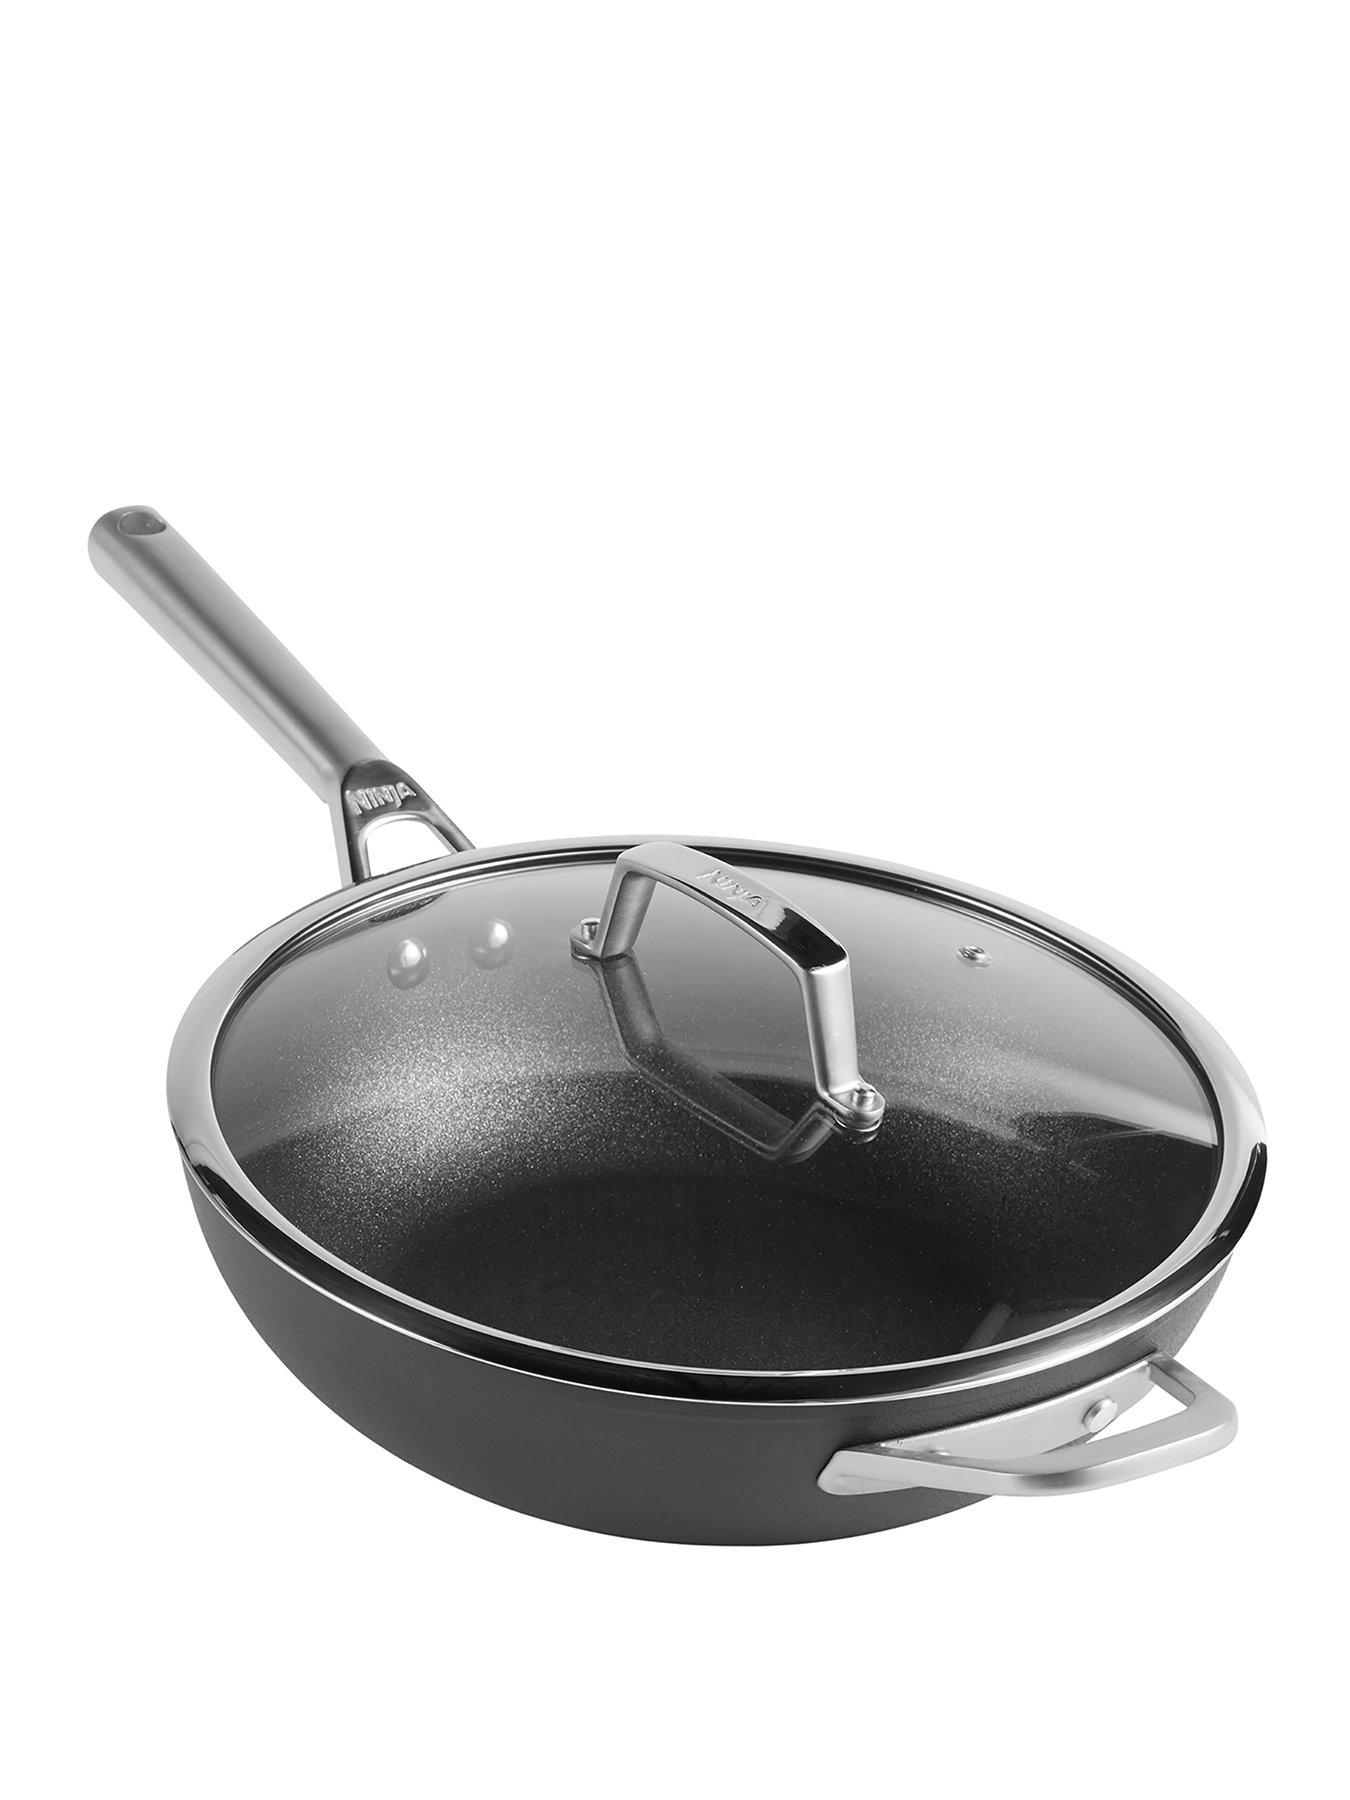 Cook Cell Hybrid Stainless/Nonstick Cookware Wok ,12.5 -Inch (32cm) – Green  Star Shop